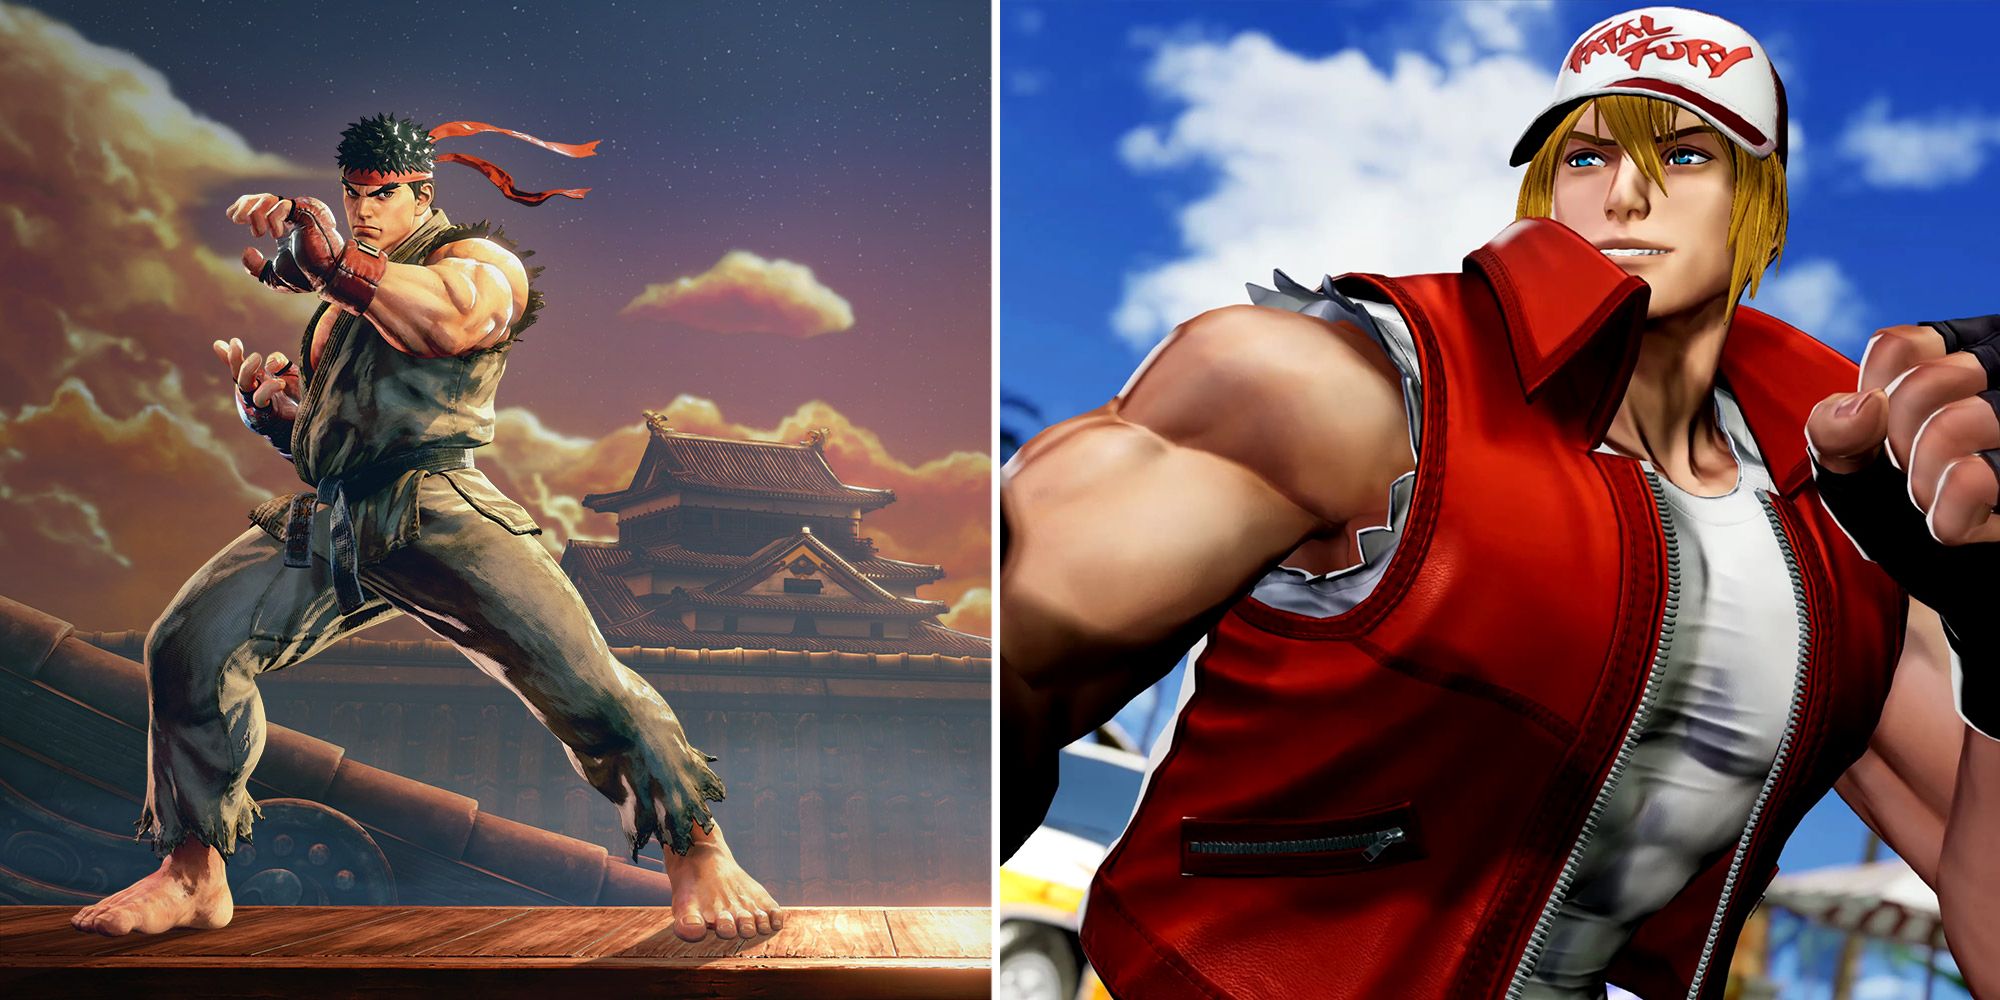 Which franchise is more popular: Street Fighter or King of Fighters? - Quora